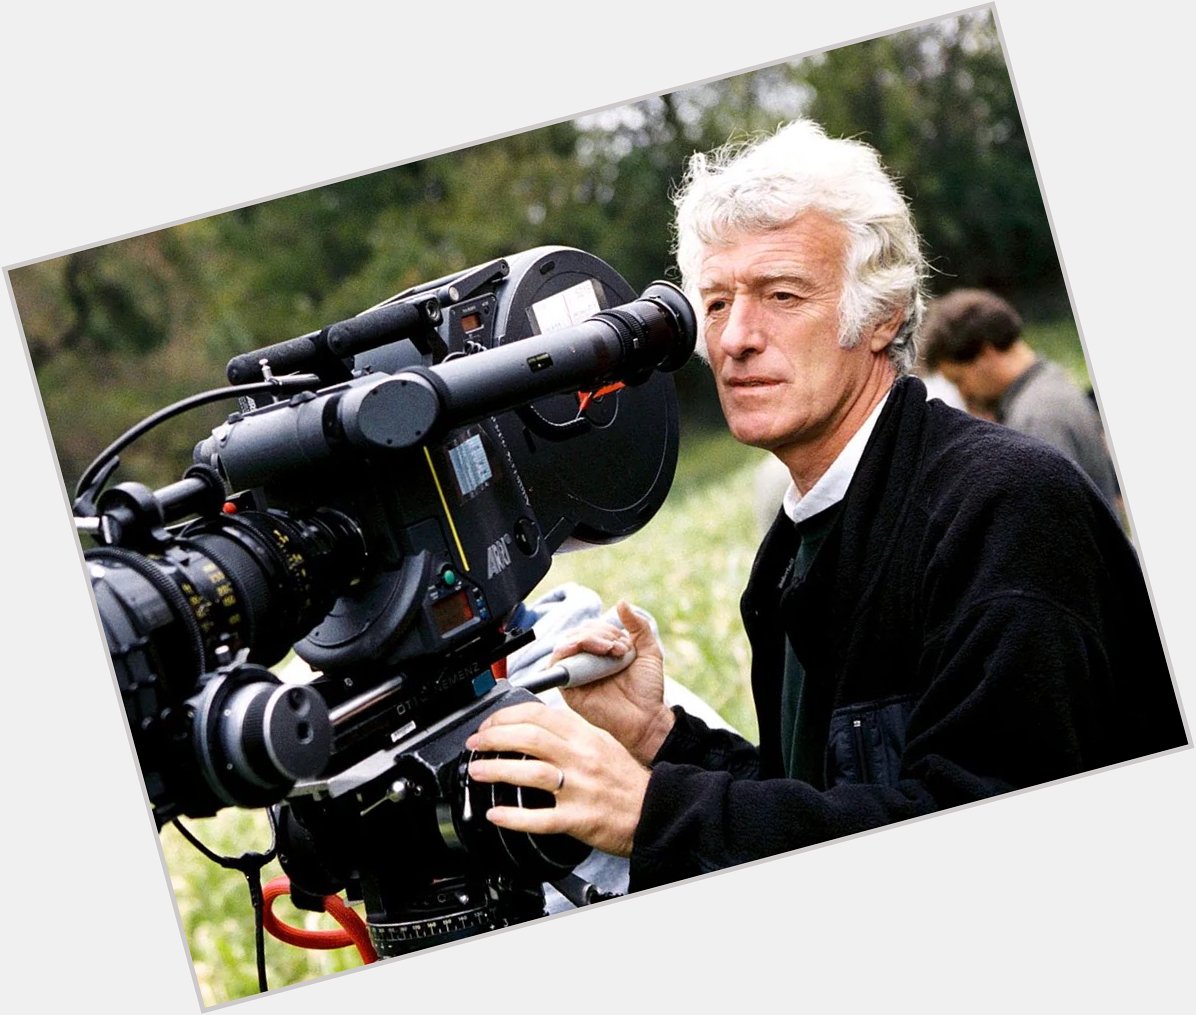 Happy birthday to the GOAT...

Sir Roger Deakins. 